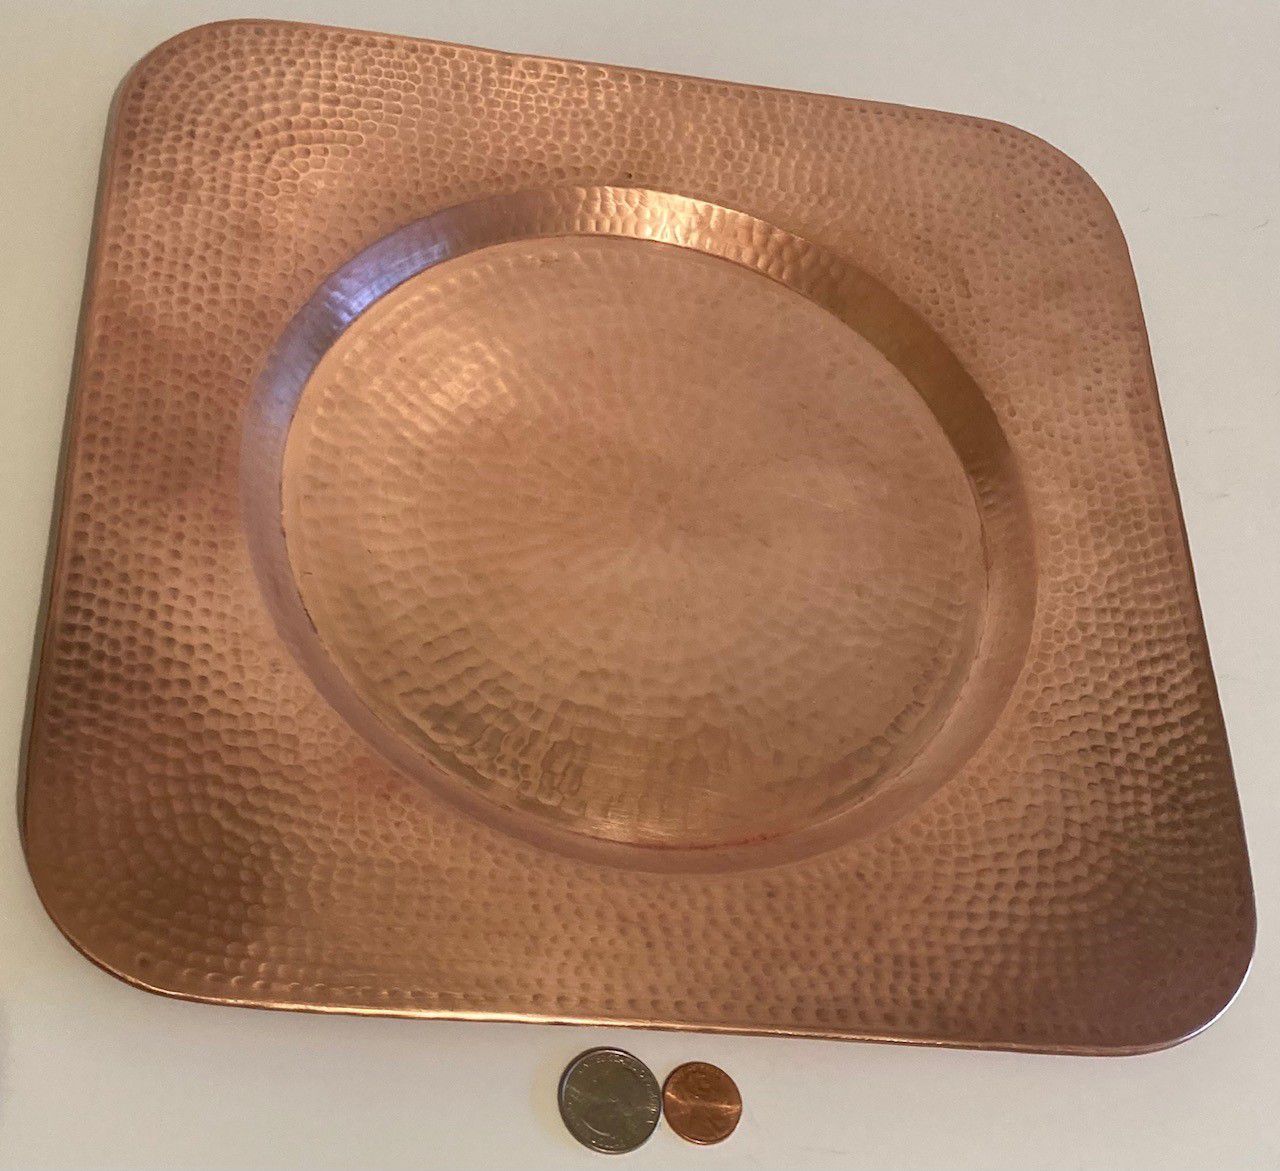 Vintage Metal Copper Hammered Metal Tray, Platter, Dish, Fruit Holder, Heavy Duty, Quality, 12" x 12", Home Decor, Kitchen Decor, Table Display, Shelf